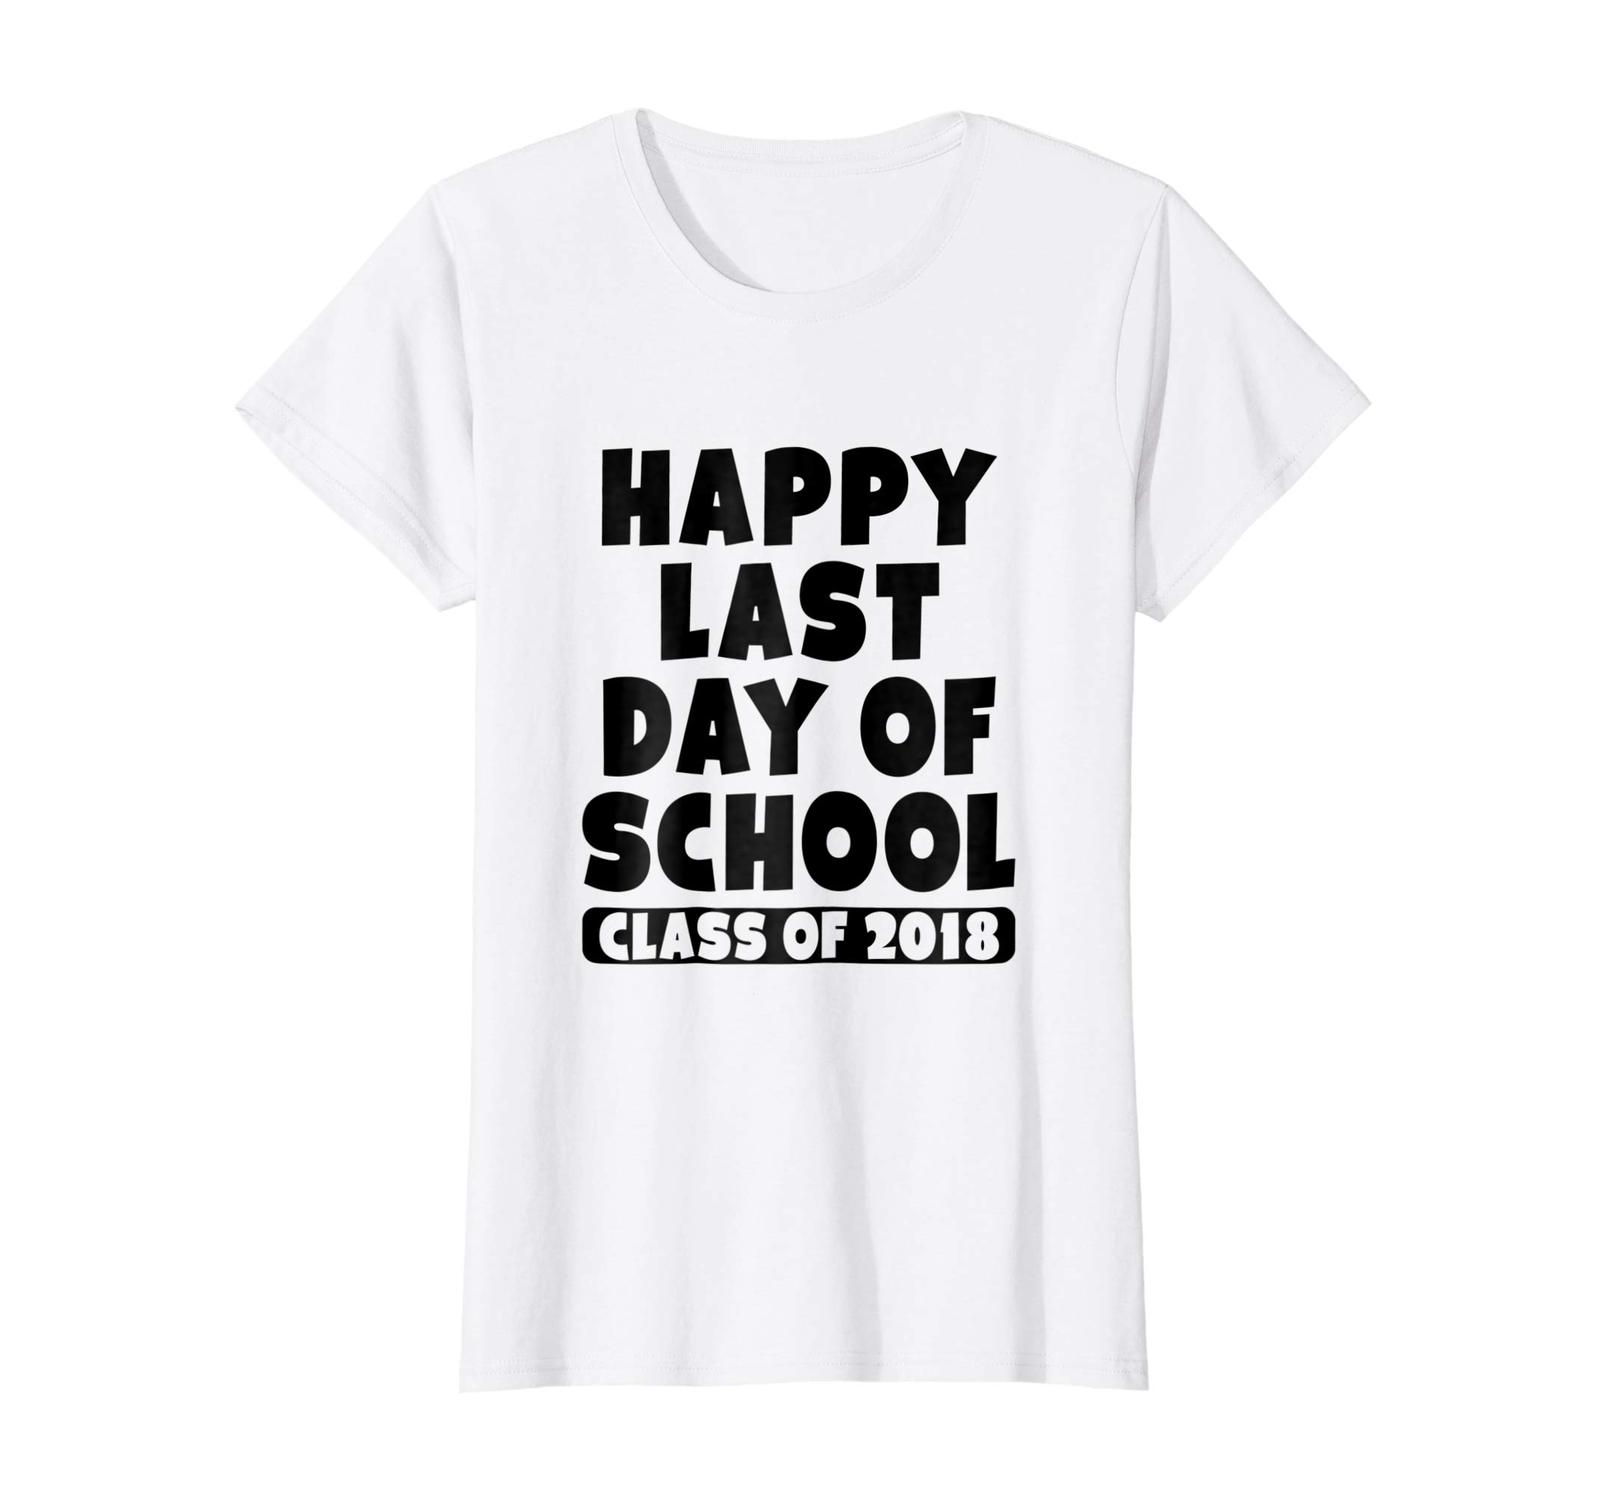 Large size shirts - Happy Last Day of School Shirt for Students and ...